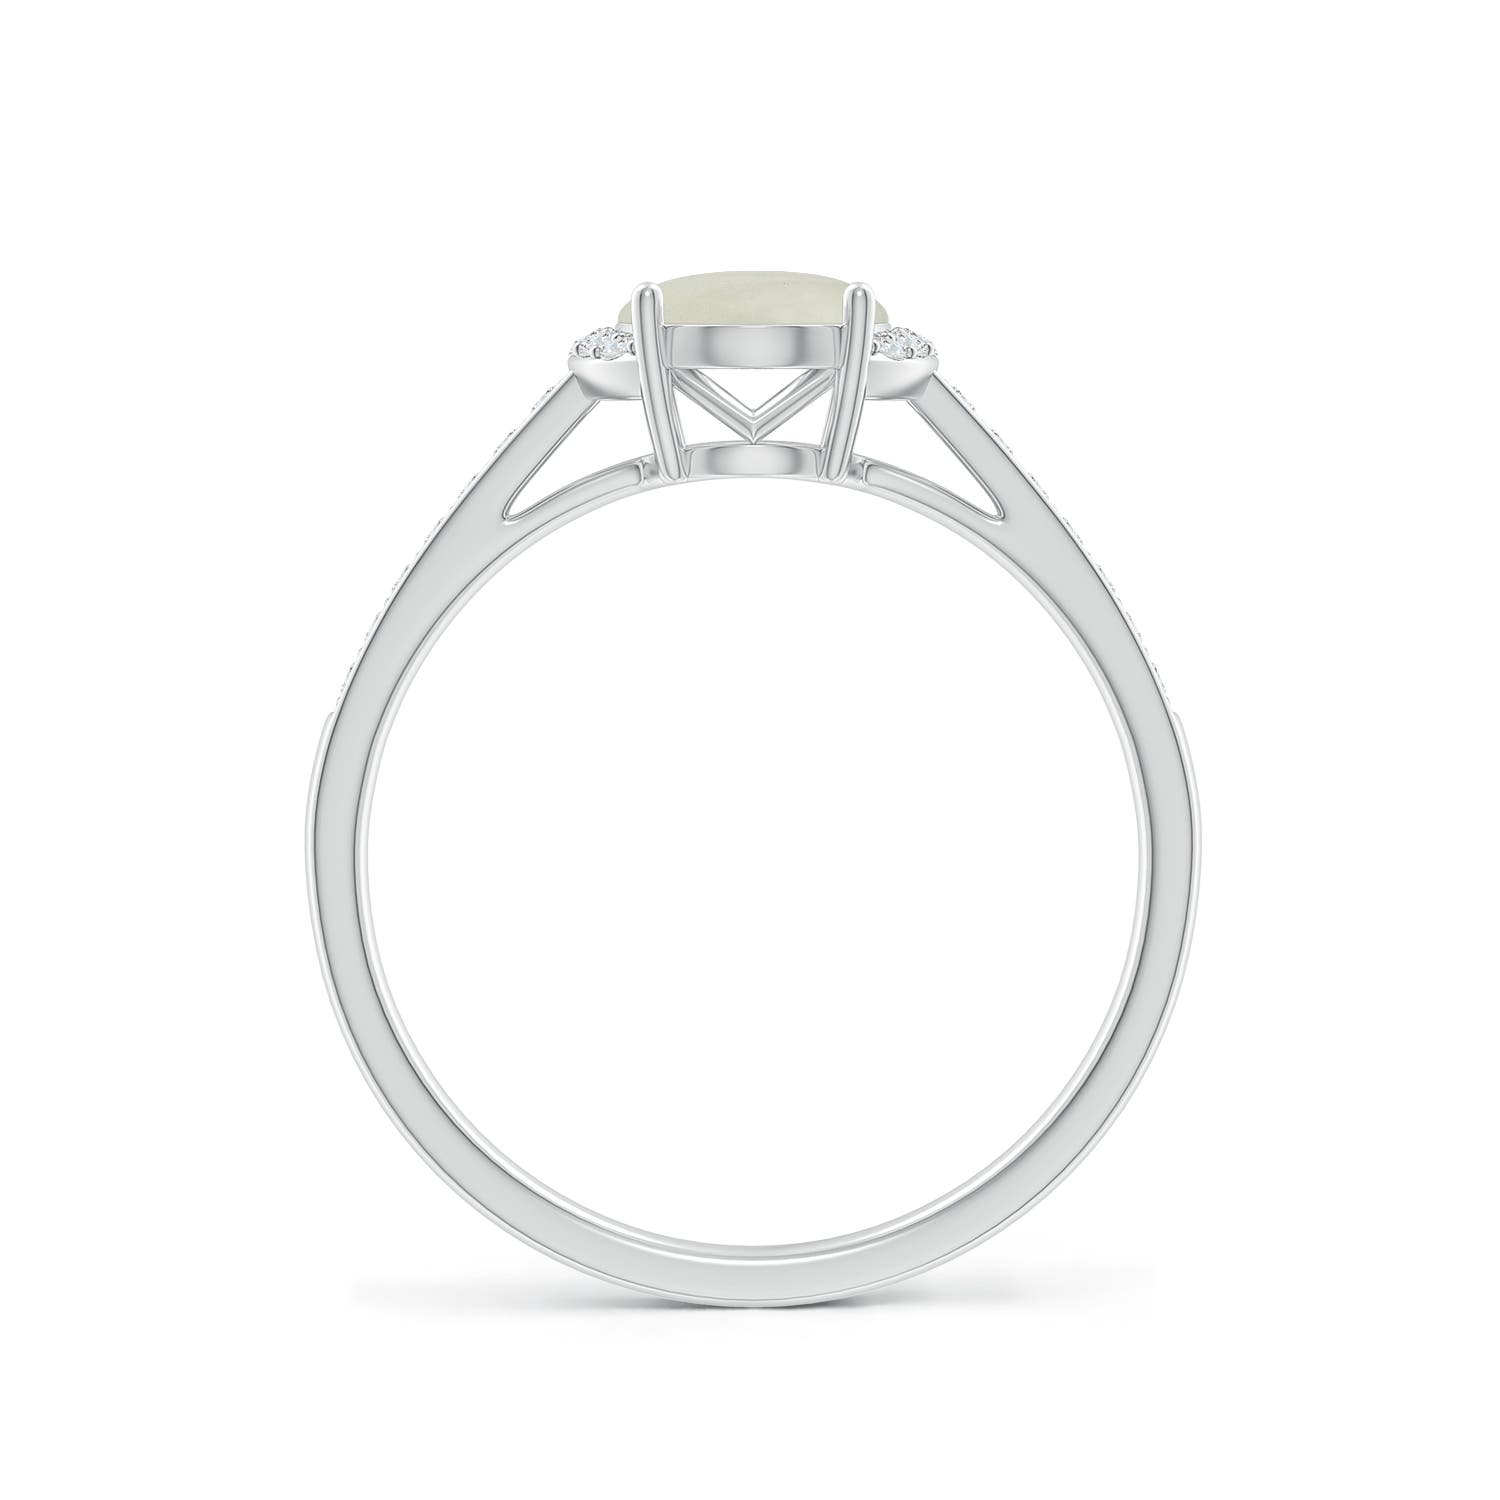 AA - Moonstone / 1.23 CT / 14 KT White Gold